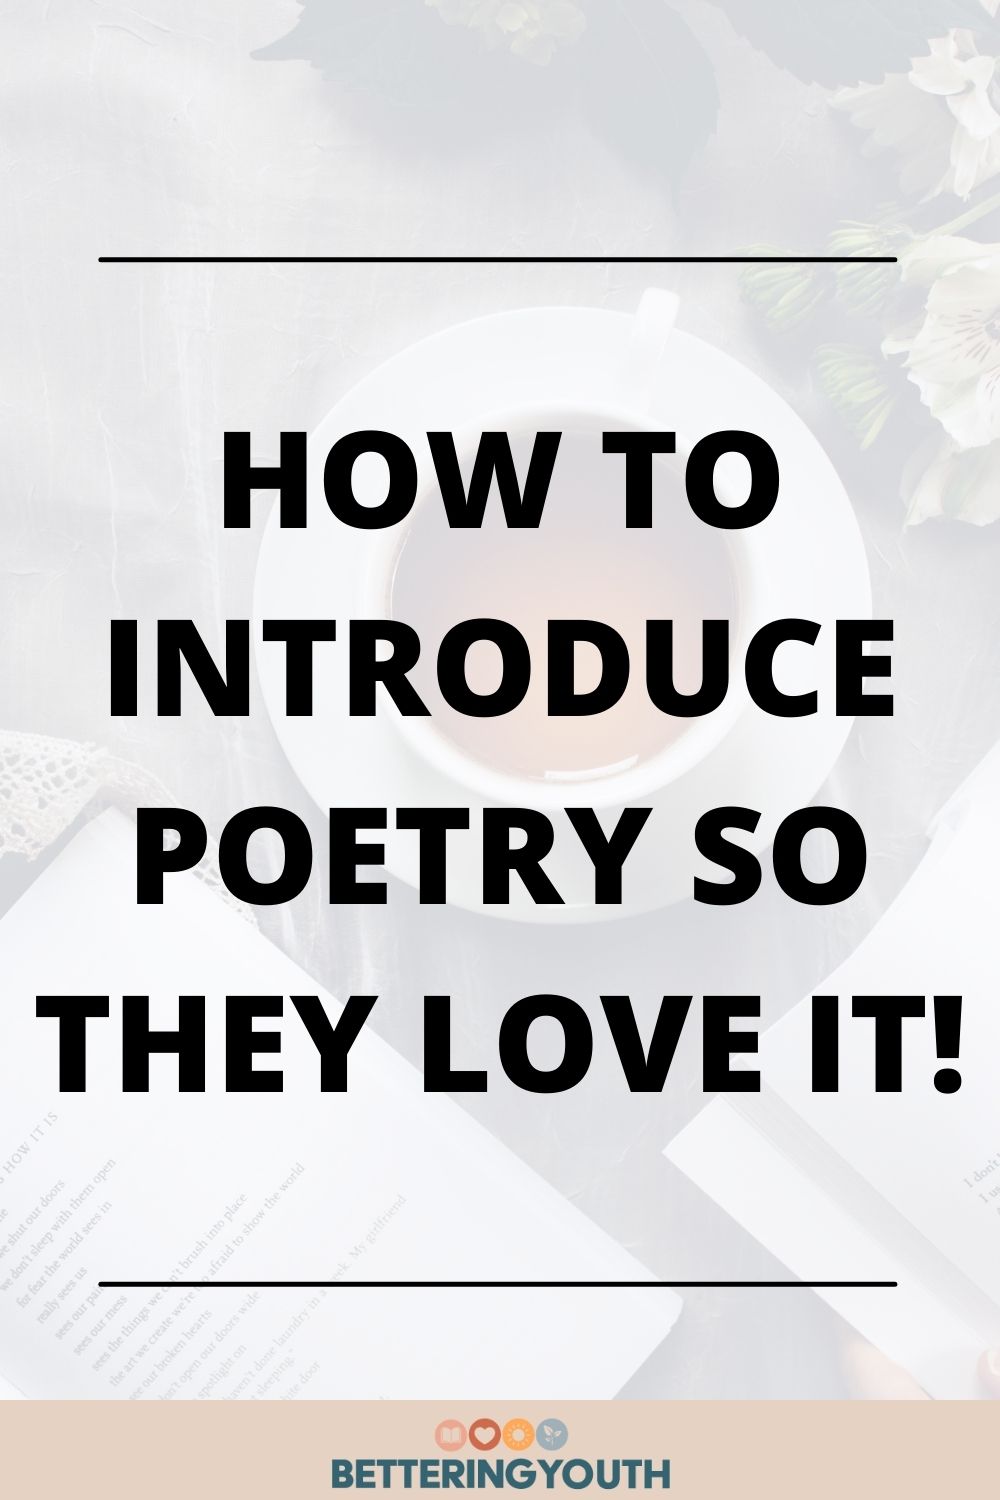 How To Introduce Poetry: Build a Love of Poetry